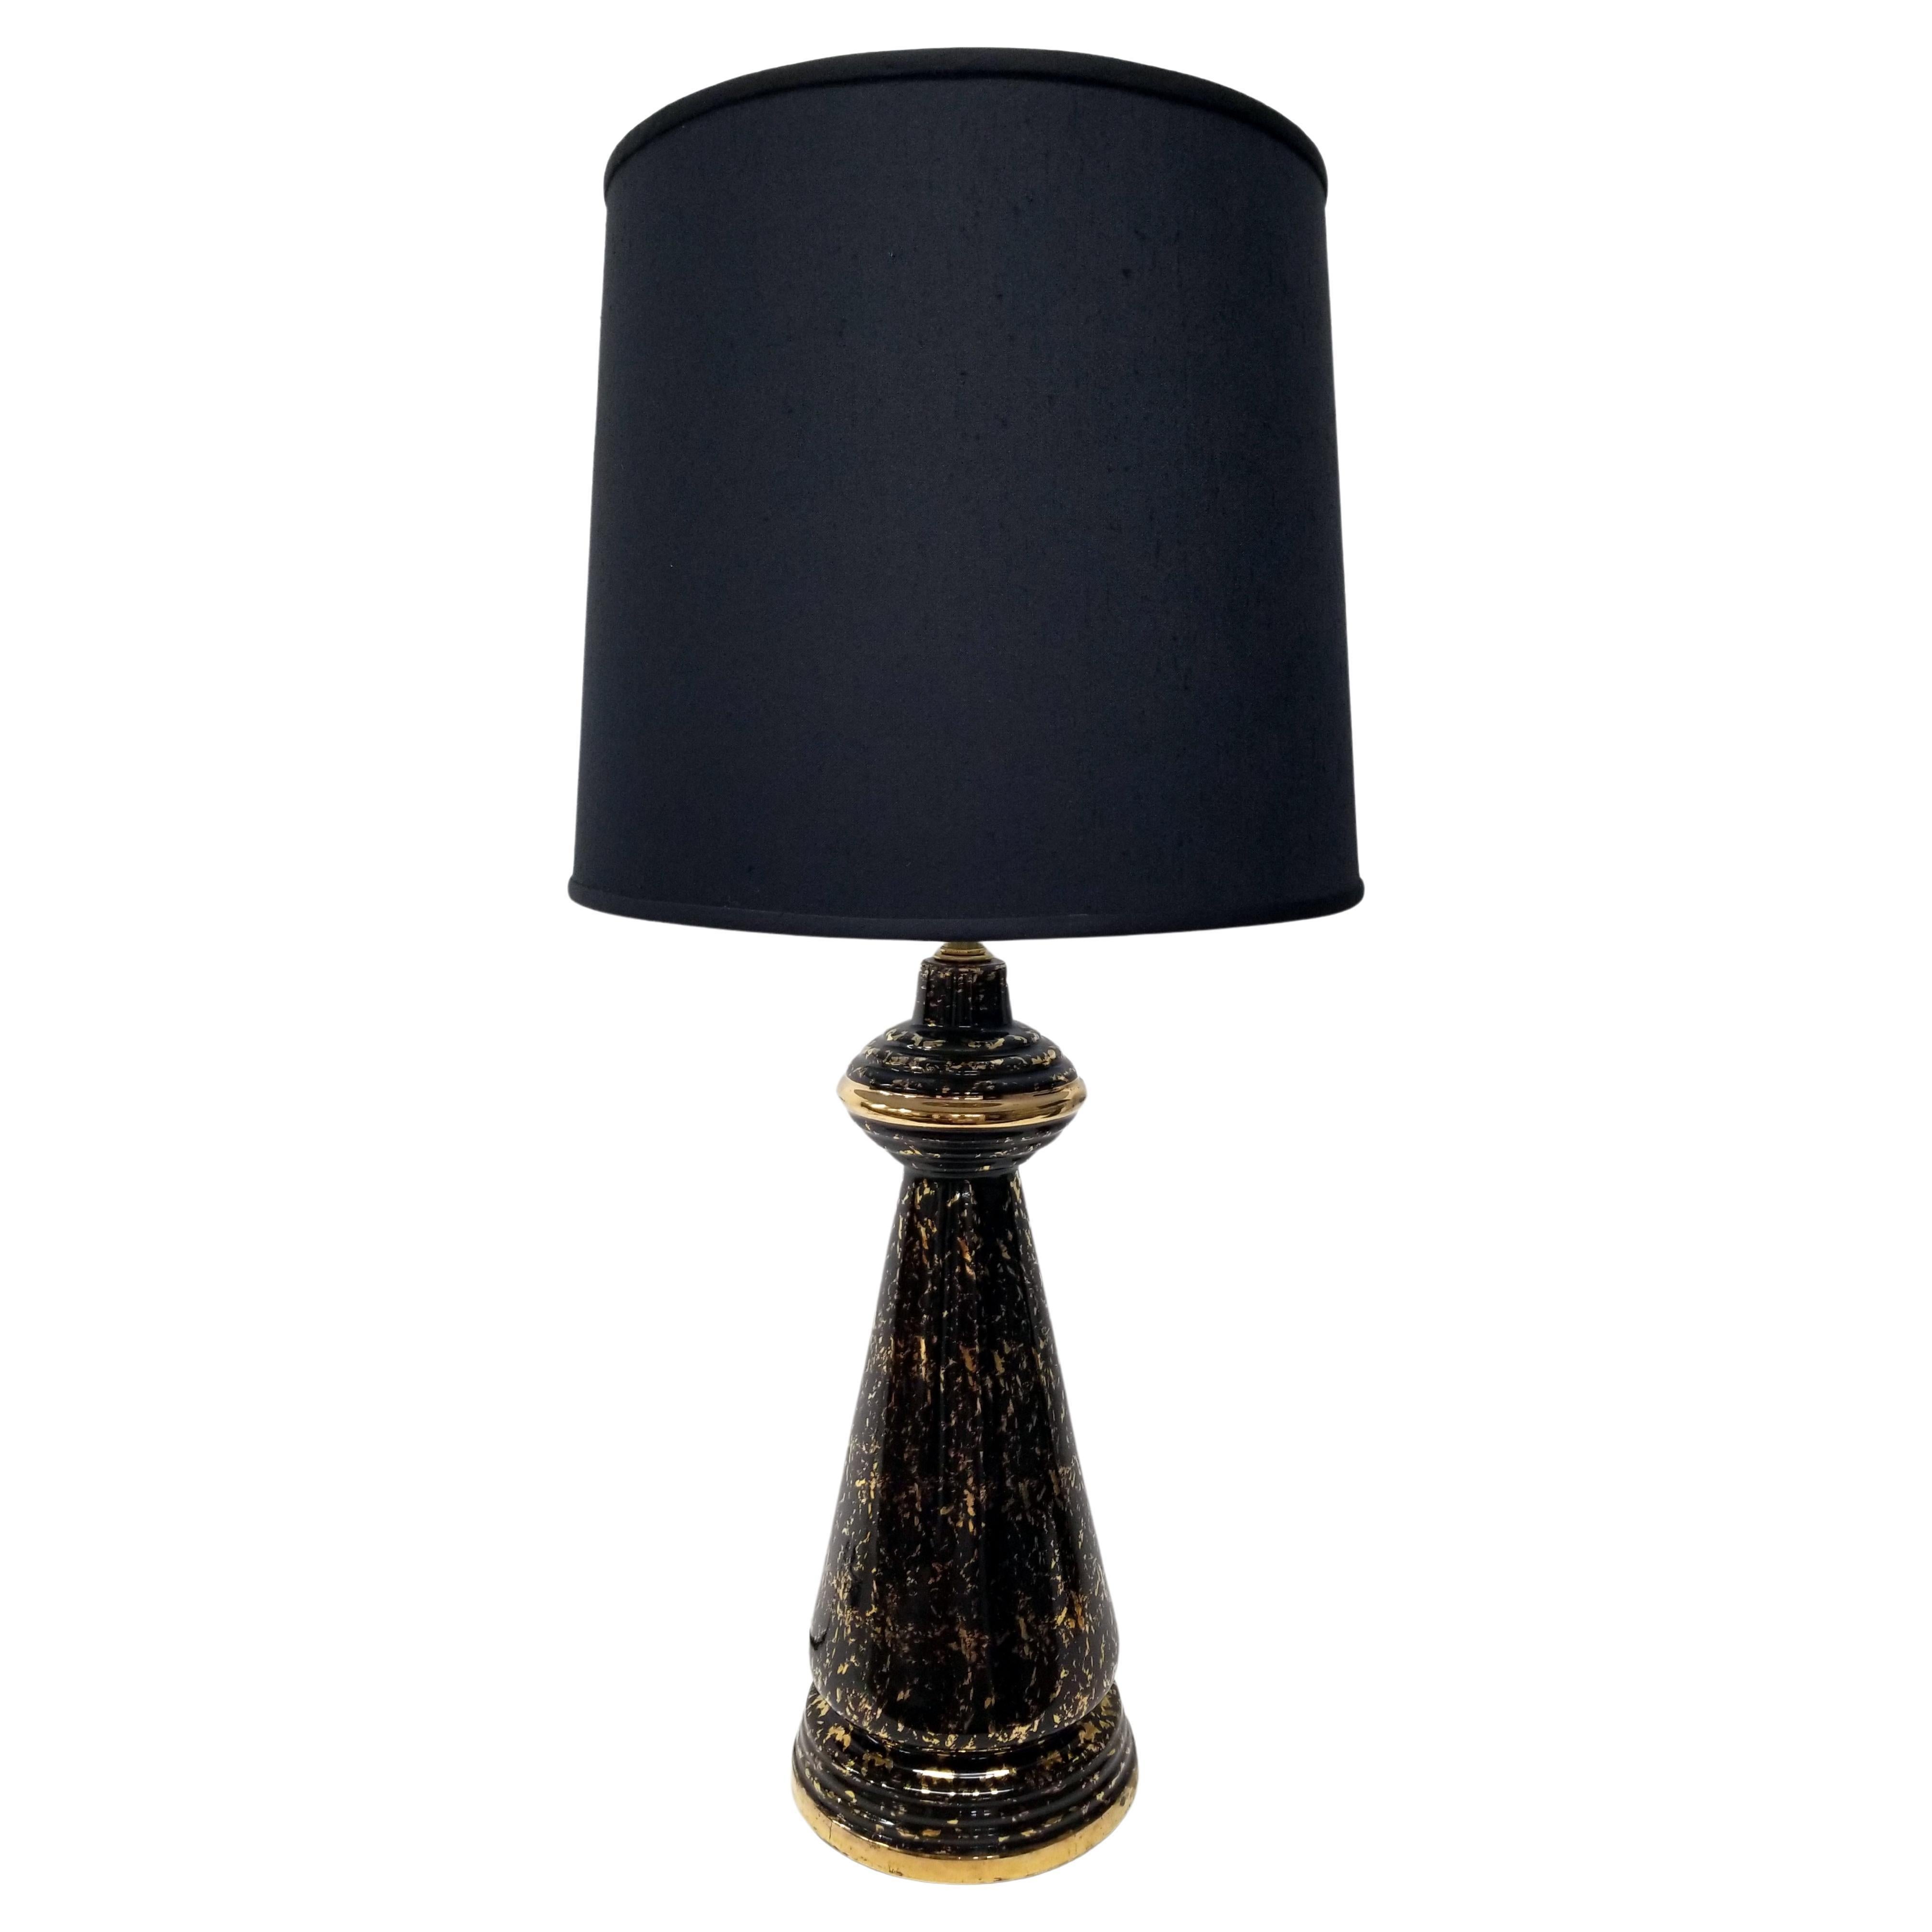 Art Deco Black and Gold Table Lamps with New Custom Shades - a Pair For Sale 1